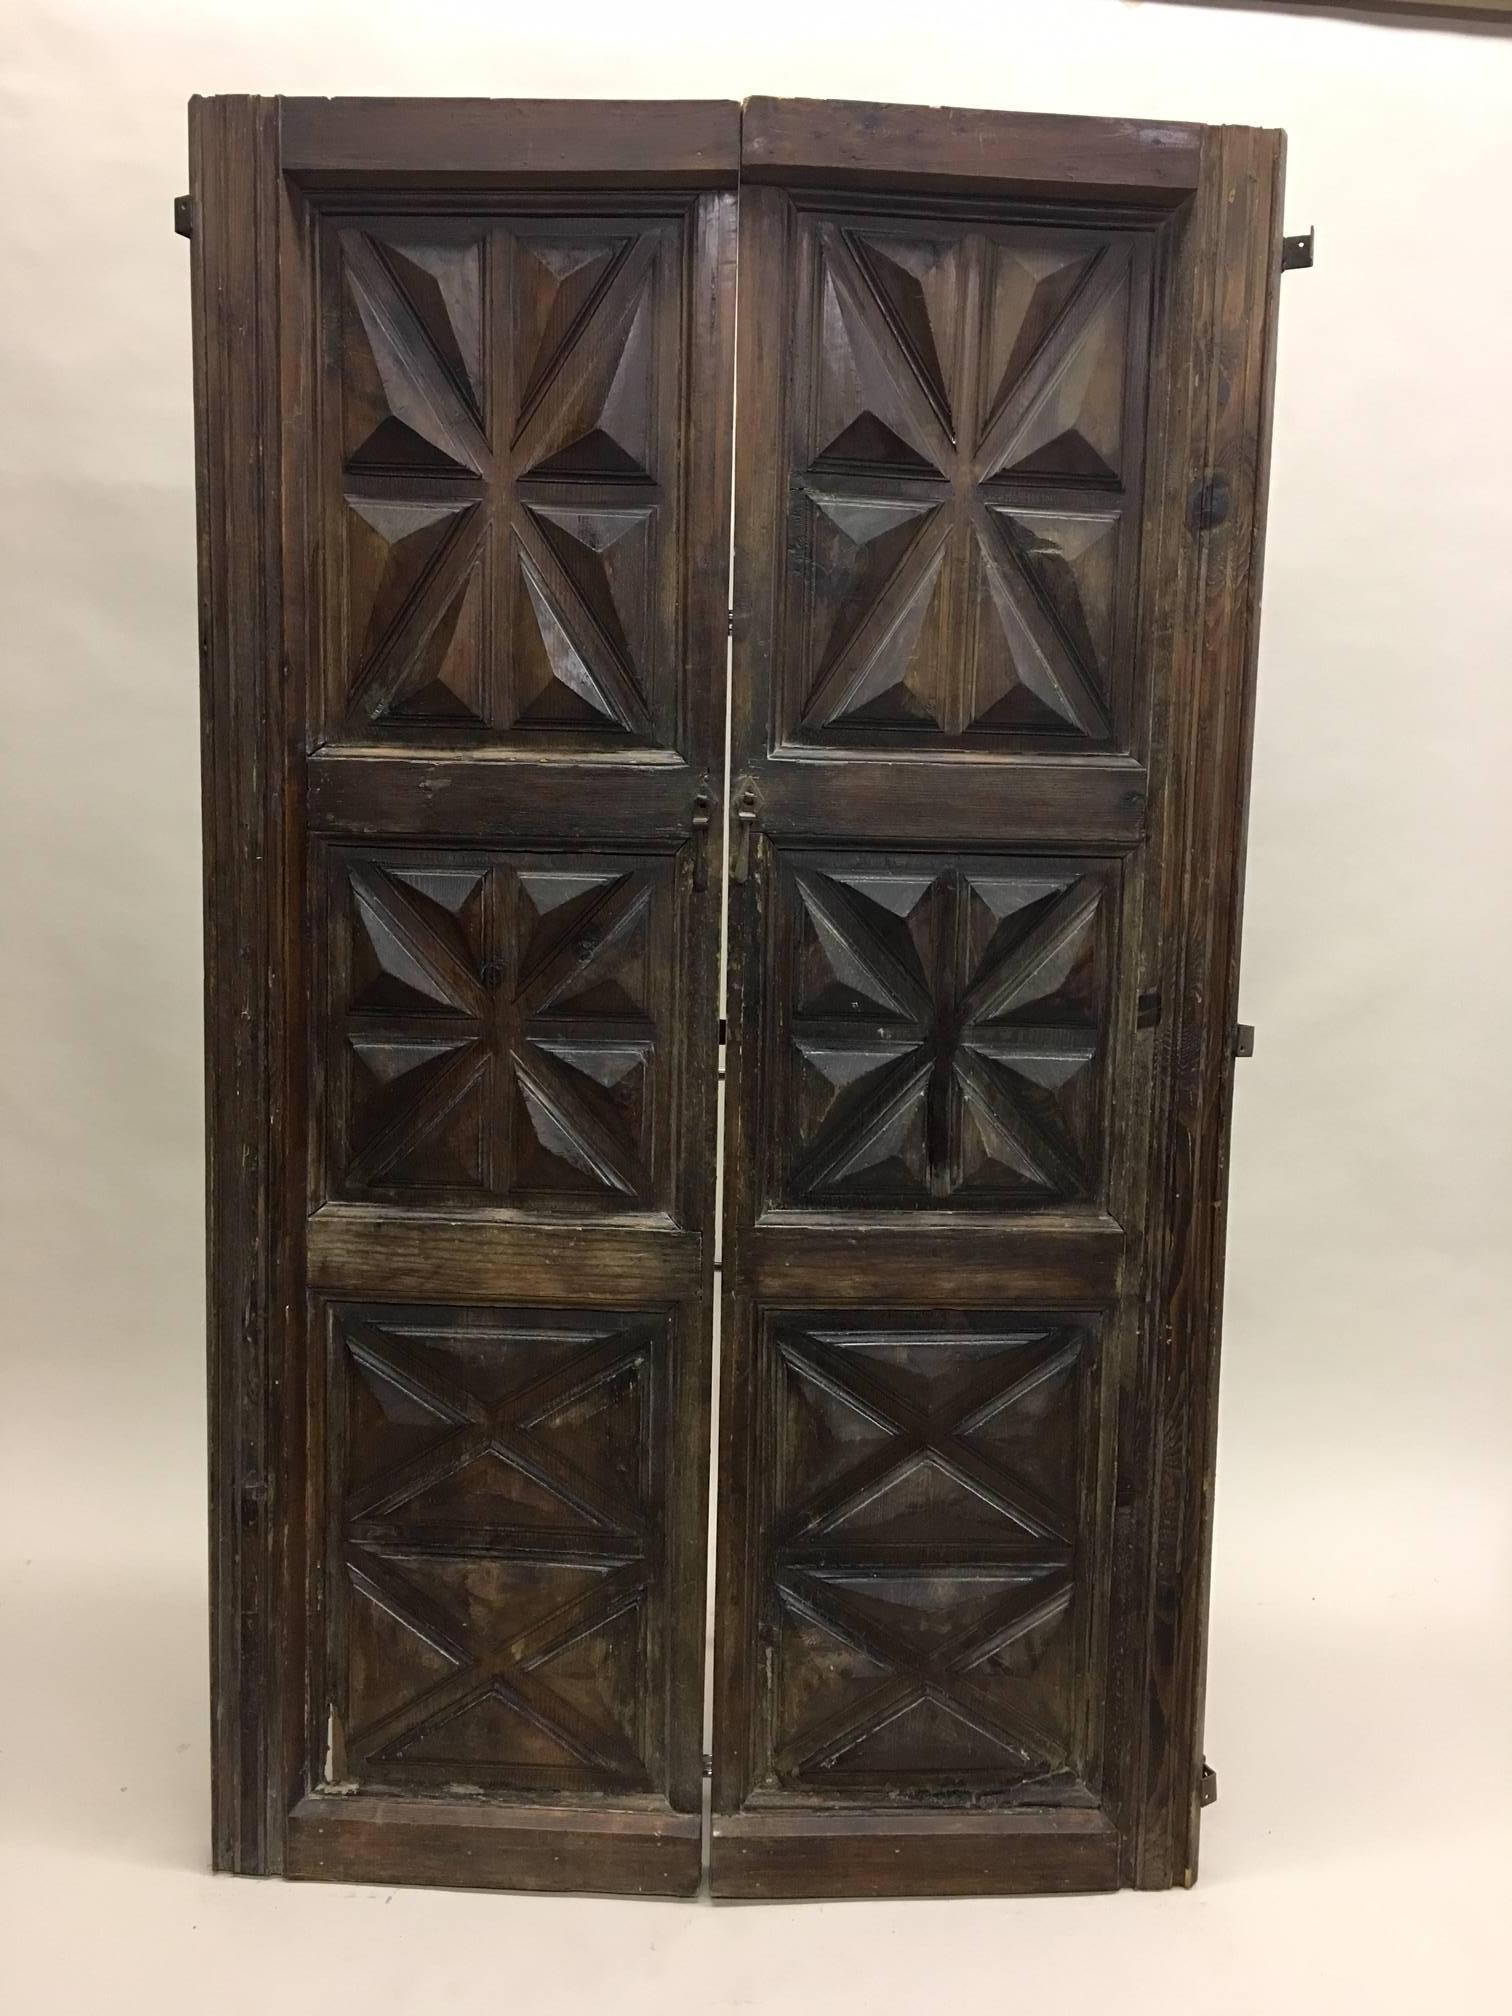 French 19th century set of hand-carved wood doors that can also function as a folding screen.

Authentic, charming wood doors with Classic diamond and lozenge patterns deeply carved into them. The doors can unite to form a folding screen.